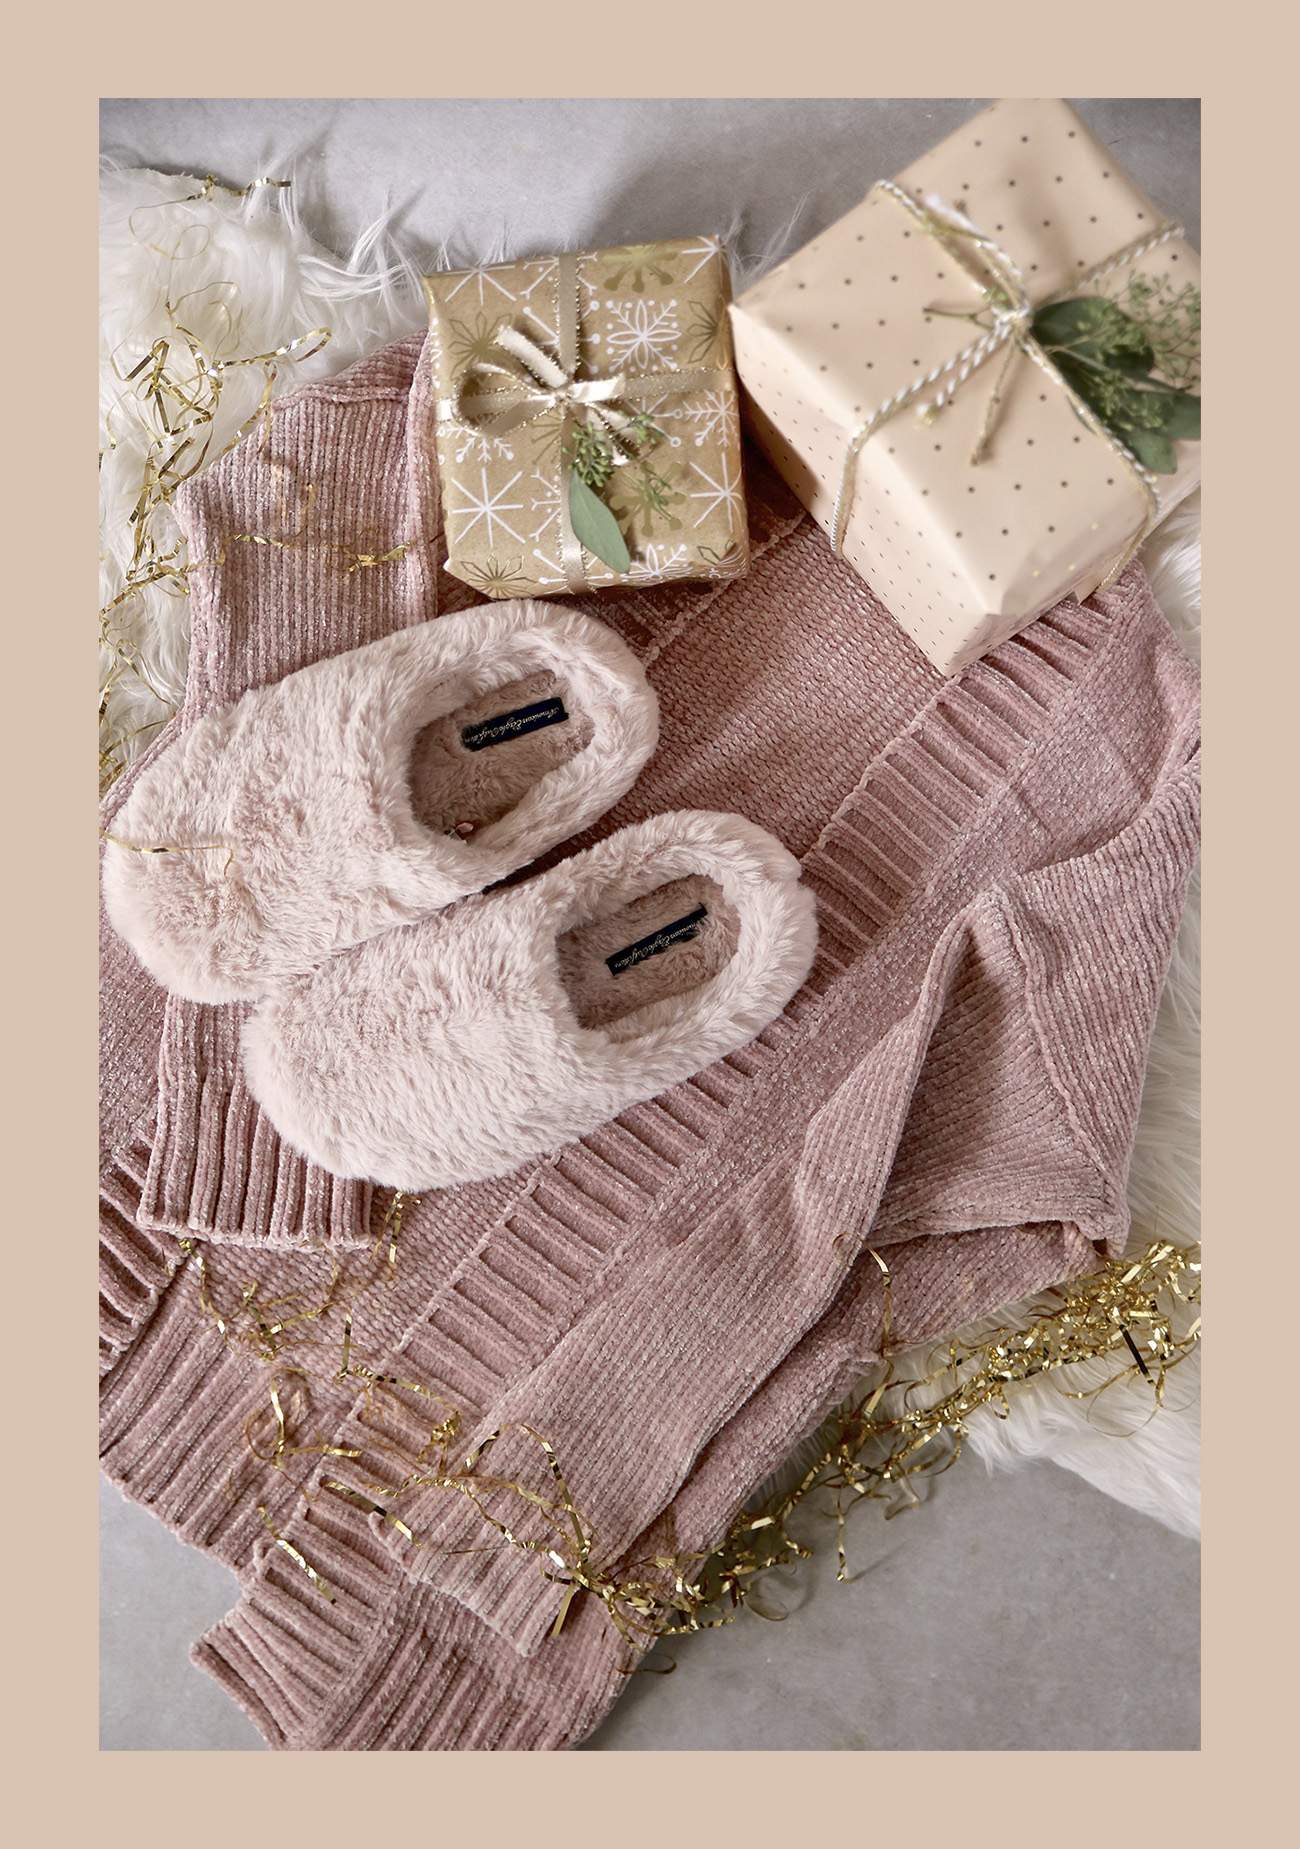 Glitter Guide x American Eagle Boho Glam Holiday Christmas Wrapping Paper Branding Styling Photographer Chenille Pink Sweater 2017